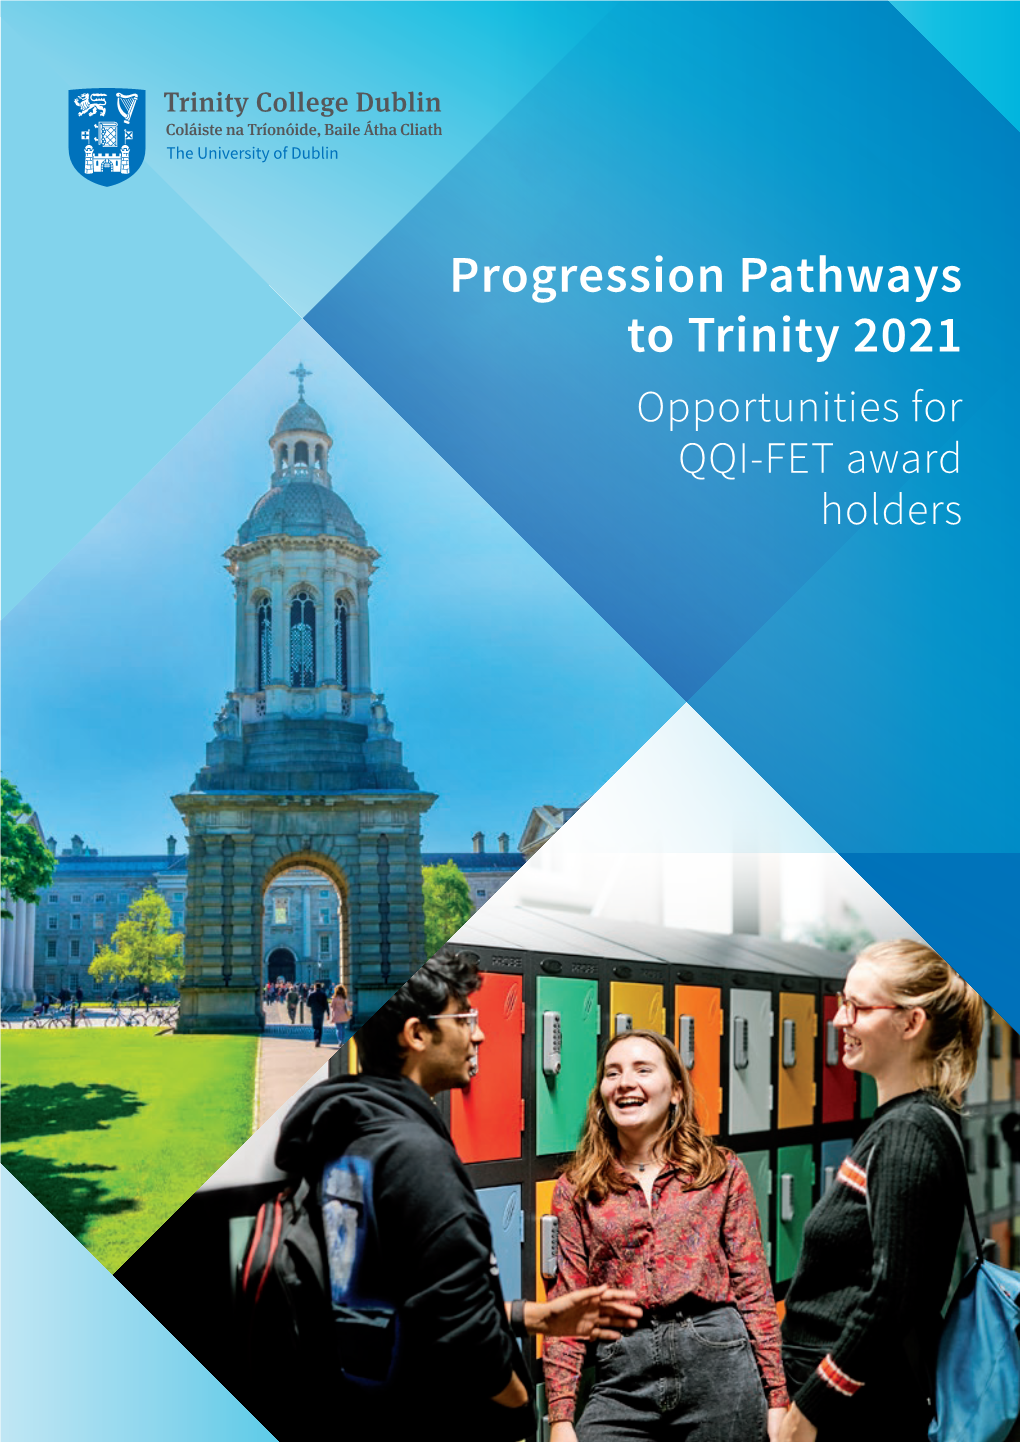 Progression Pathways to Trinity 2021 Opportunities for QQI-FET Award Holders